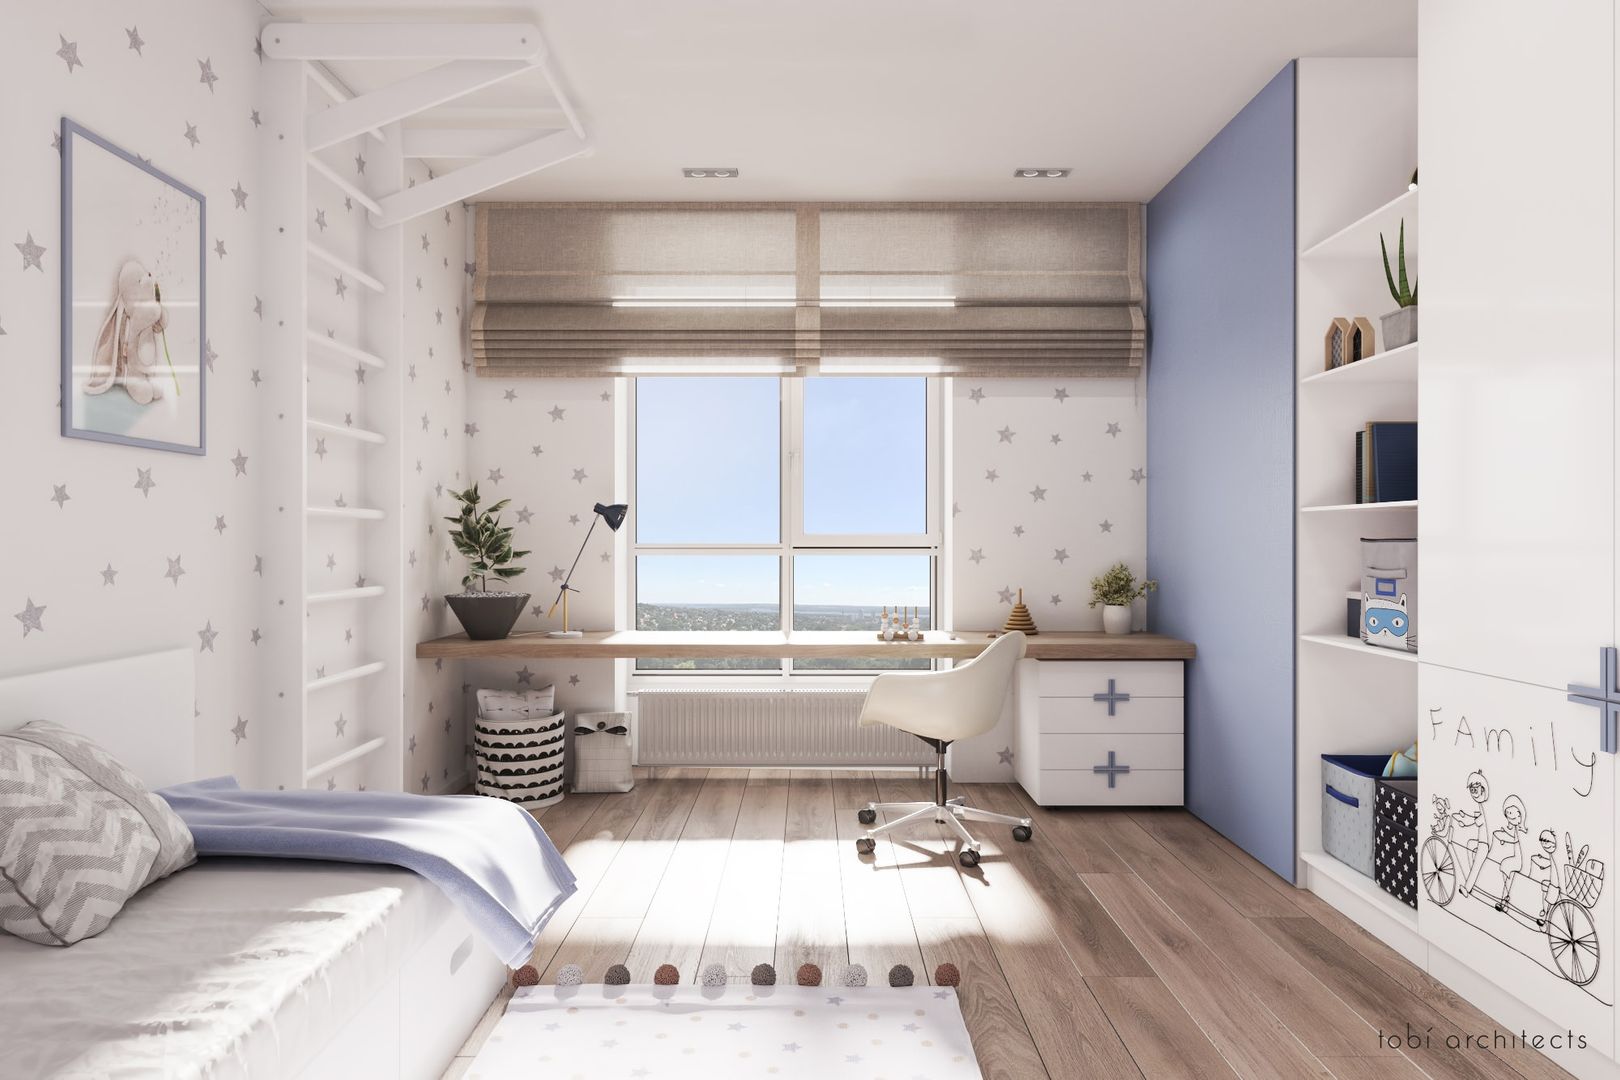 LIGHT AND BLUE Tobi Architects Teen bedroom